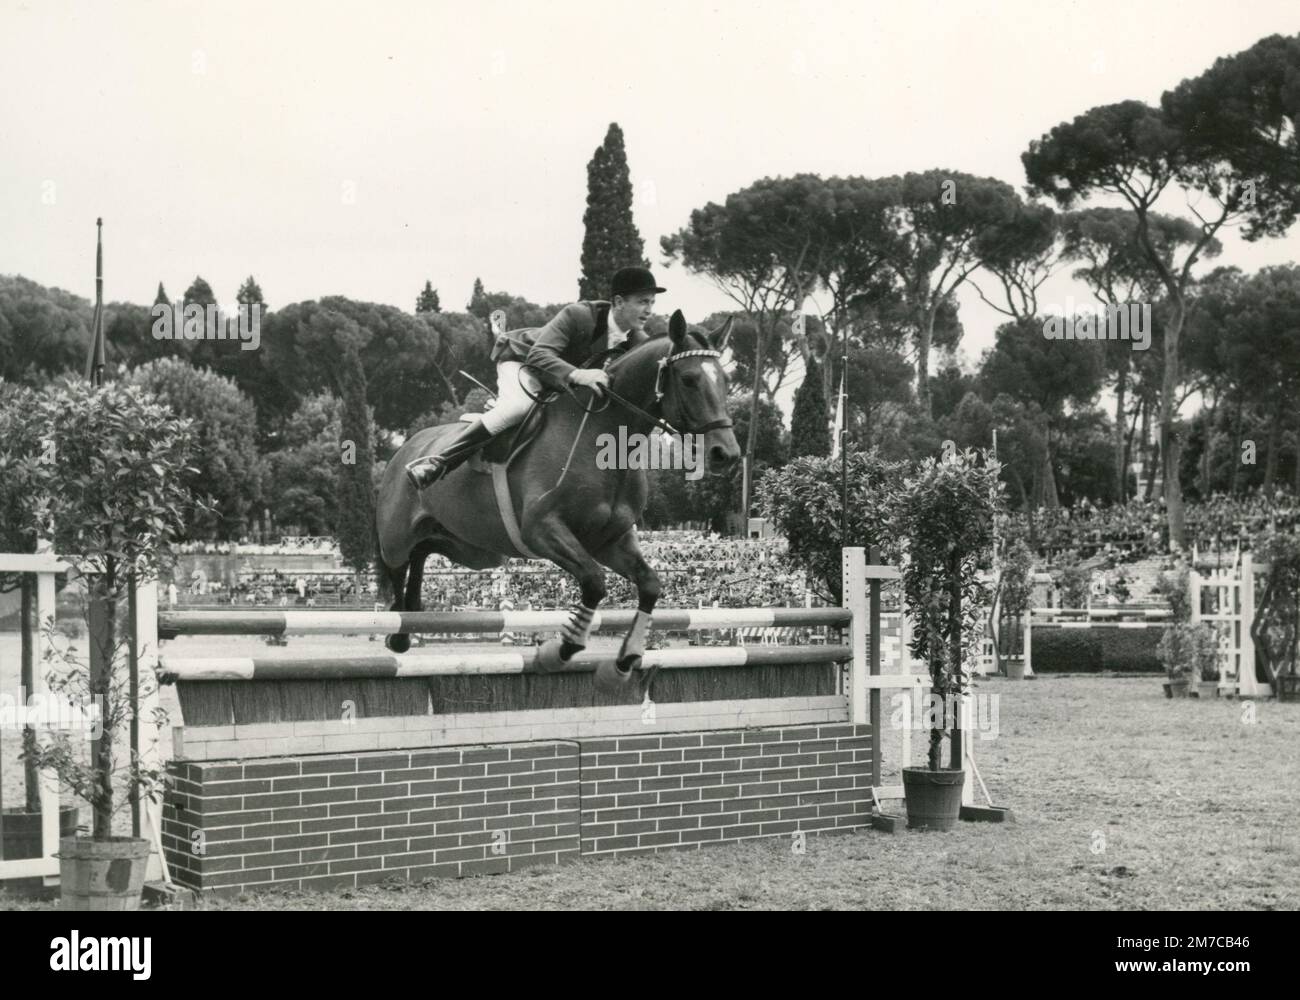 Rider at the horse jumping show in Piazza di Siena, Rome, Italy 1960s Stock Photo